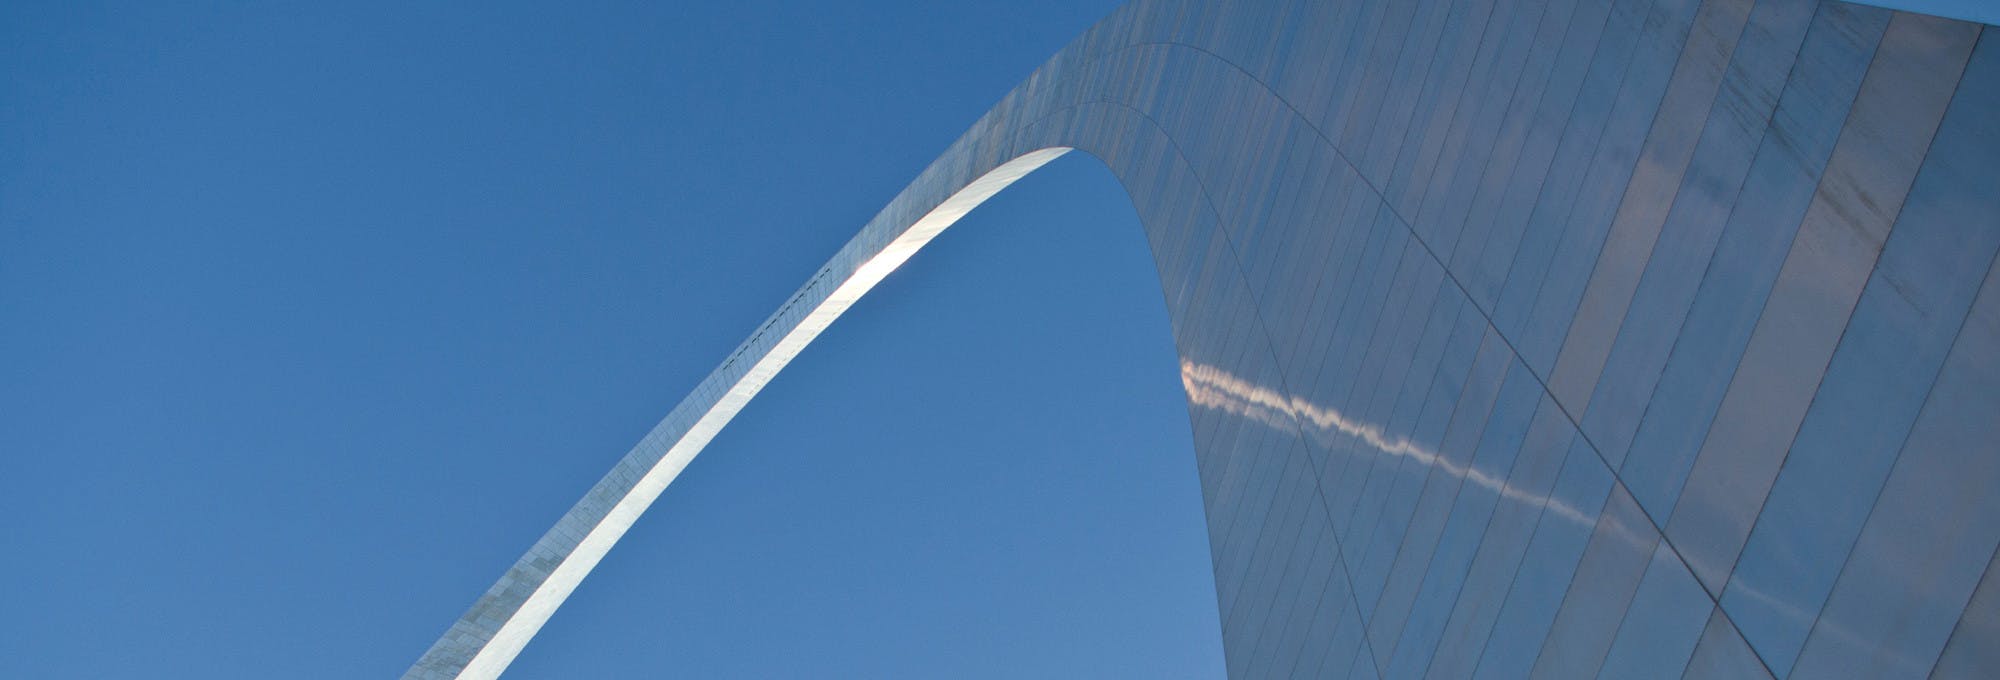 The St. Louis arc representing Critical Points